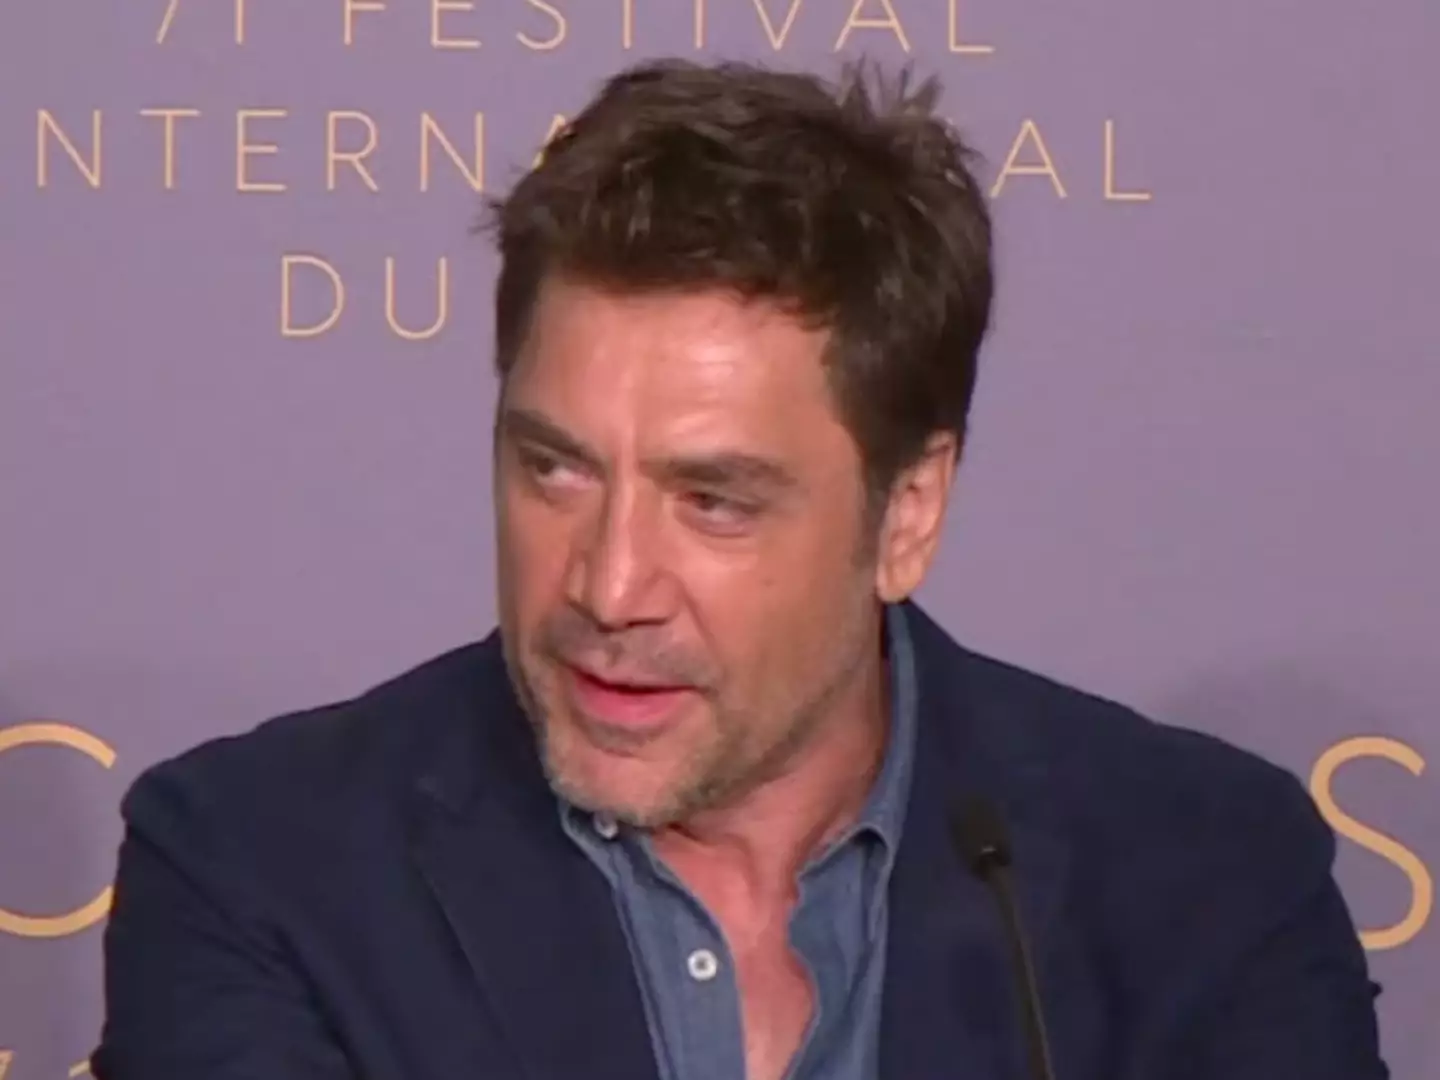 People are praising Javier Bardem for how he handled the 'asinine' question.